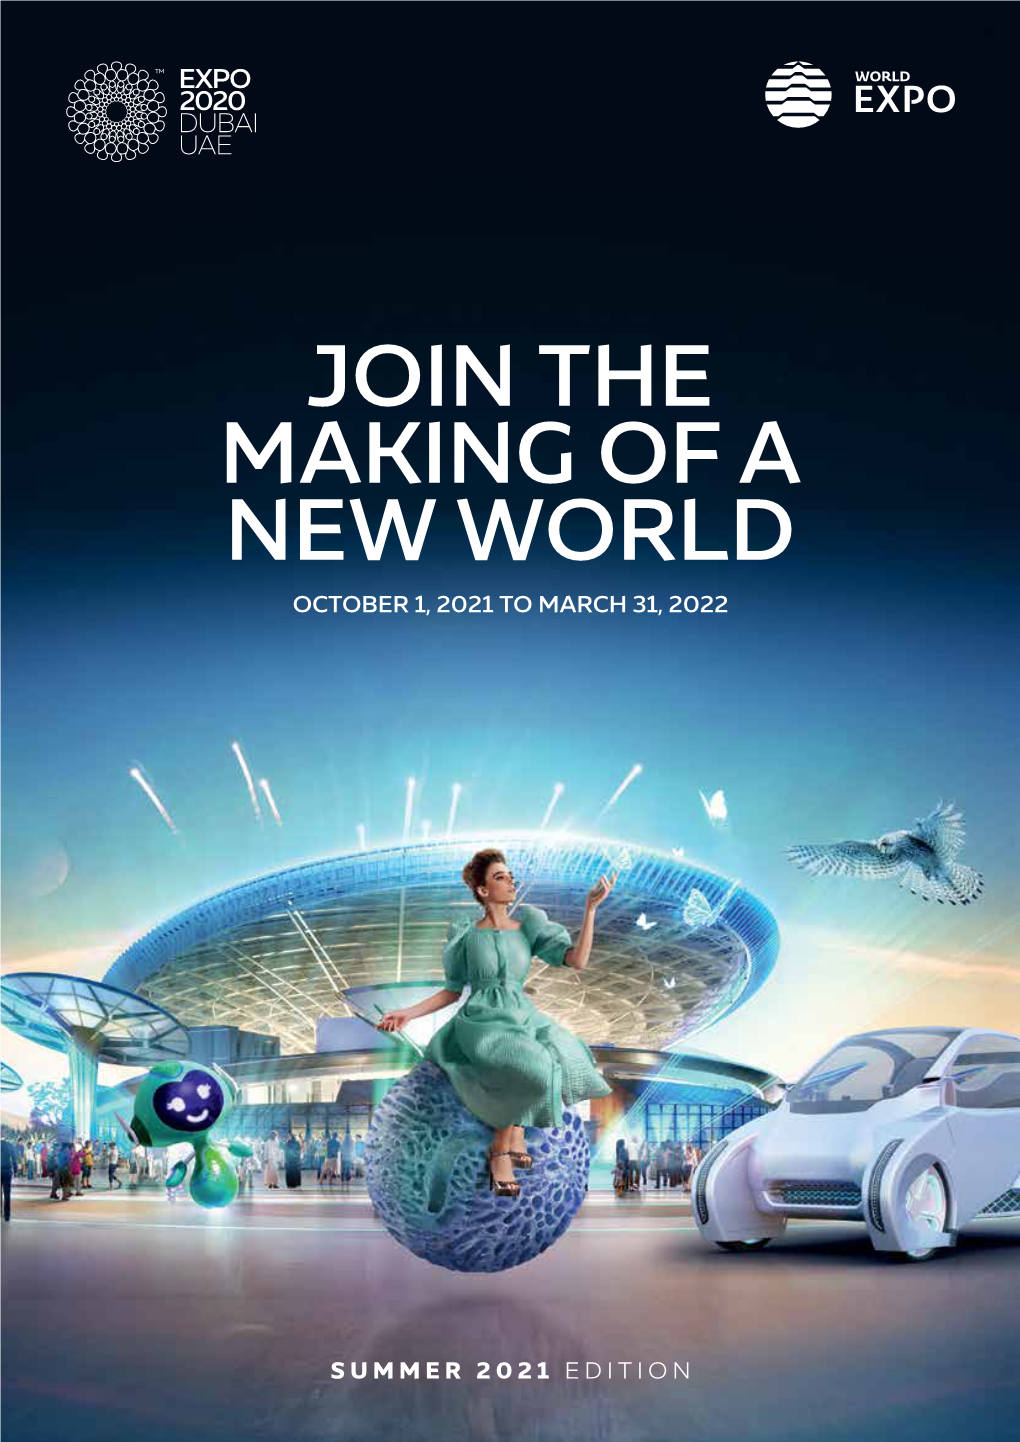 Join the Making of a New World October 1, 2021 to March 31, 2022